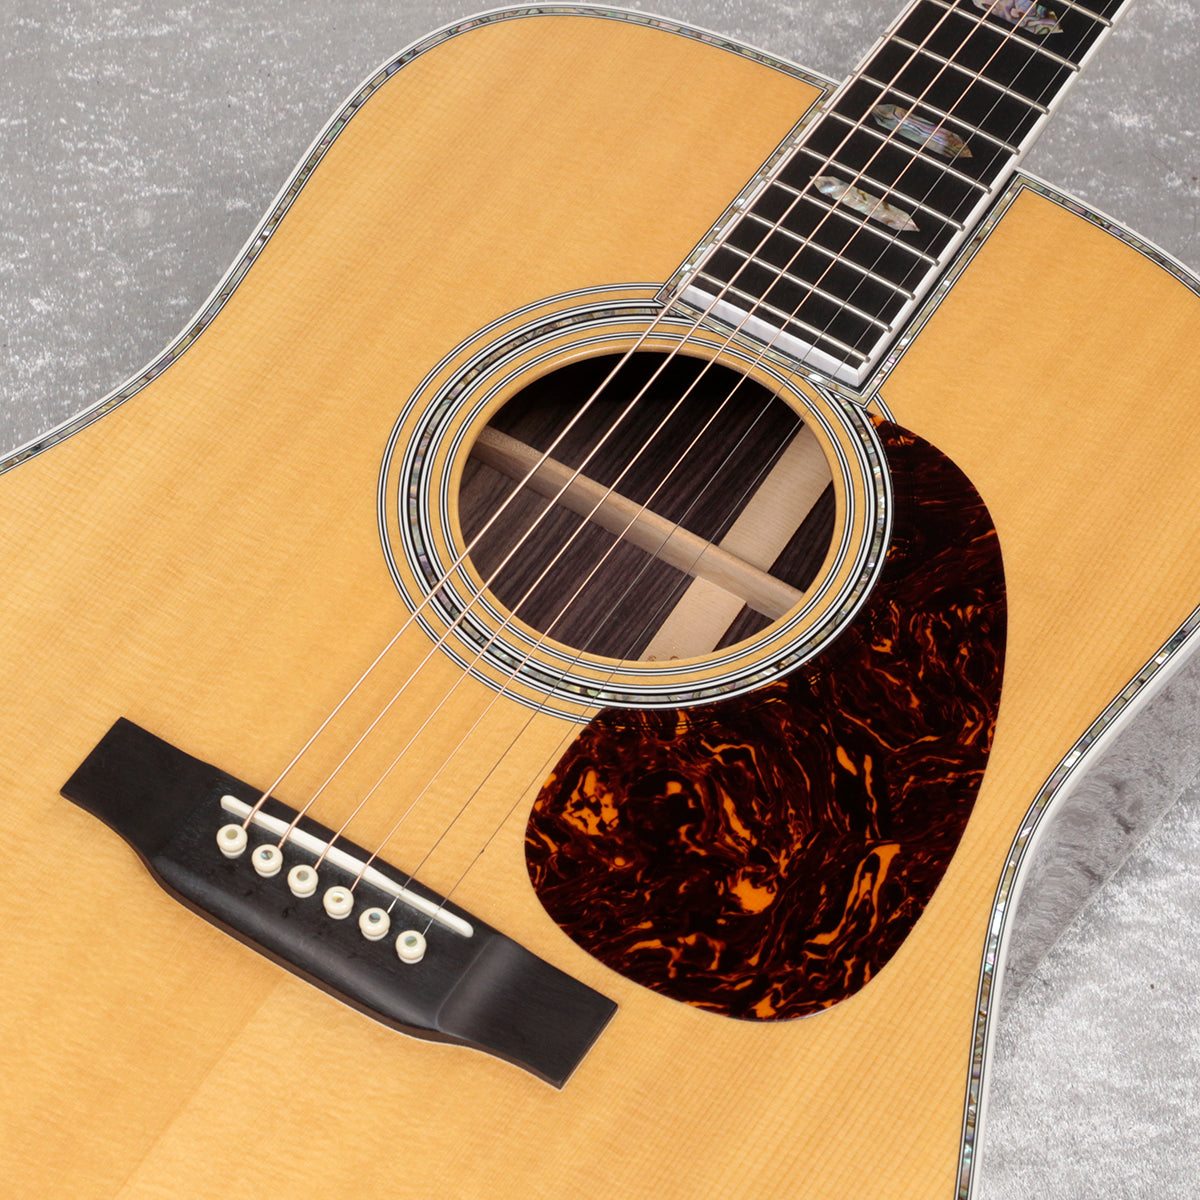 [SN 1758058] USED Martin / D-45 made in 2014 [06]